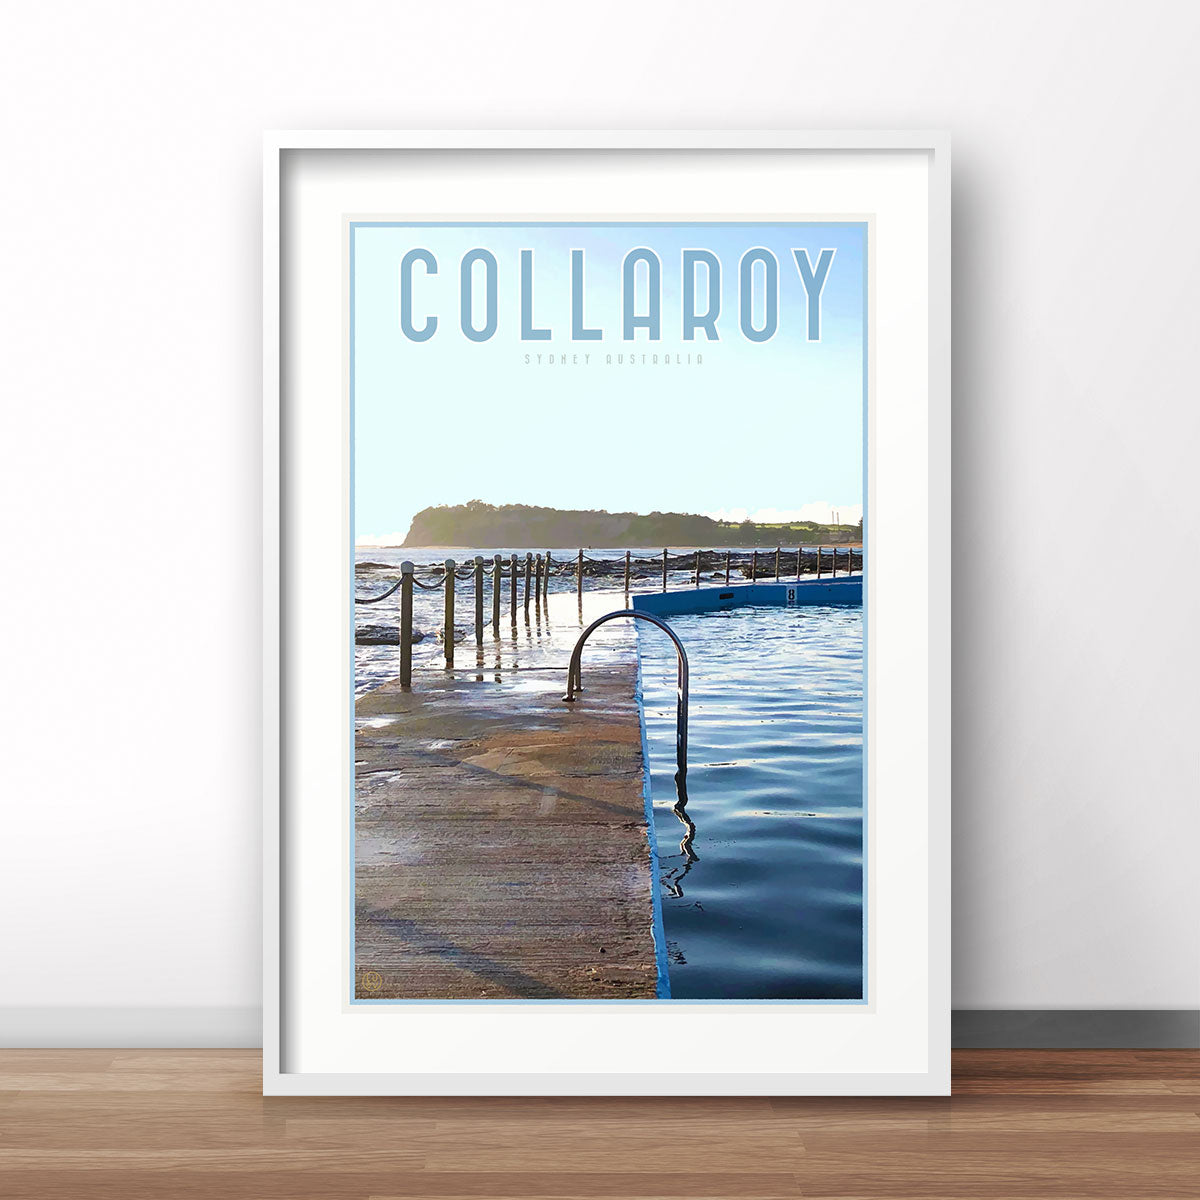 Collaroy Pool Print - vintage travel style by Places we Luv